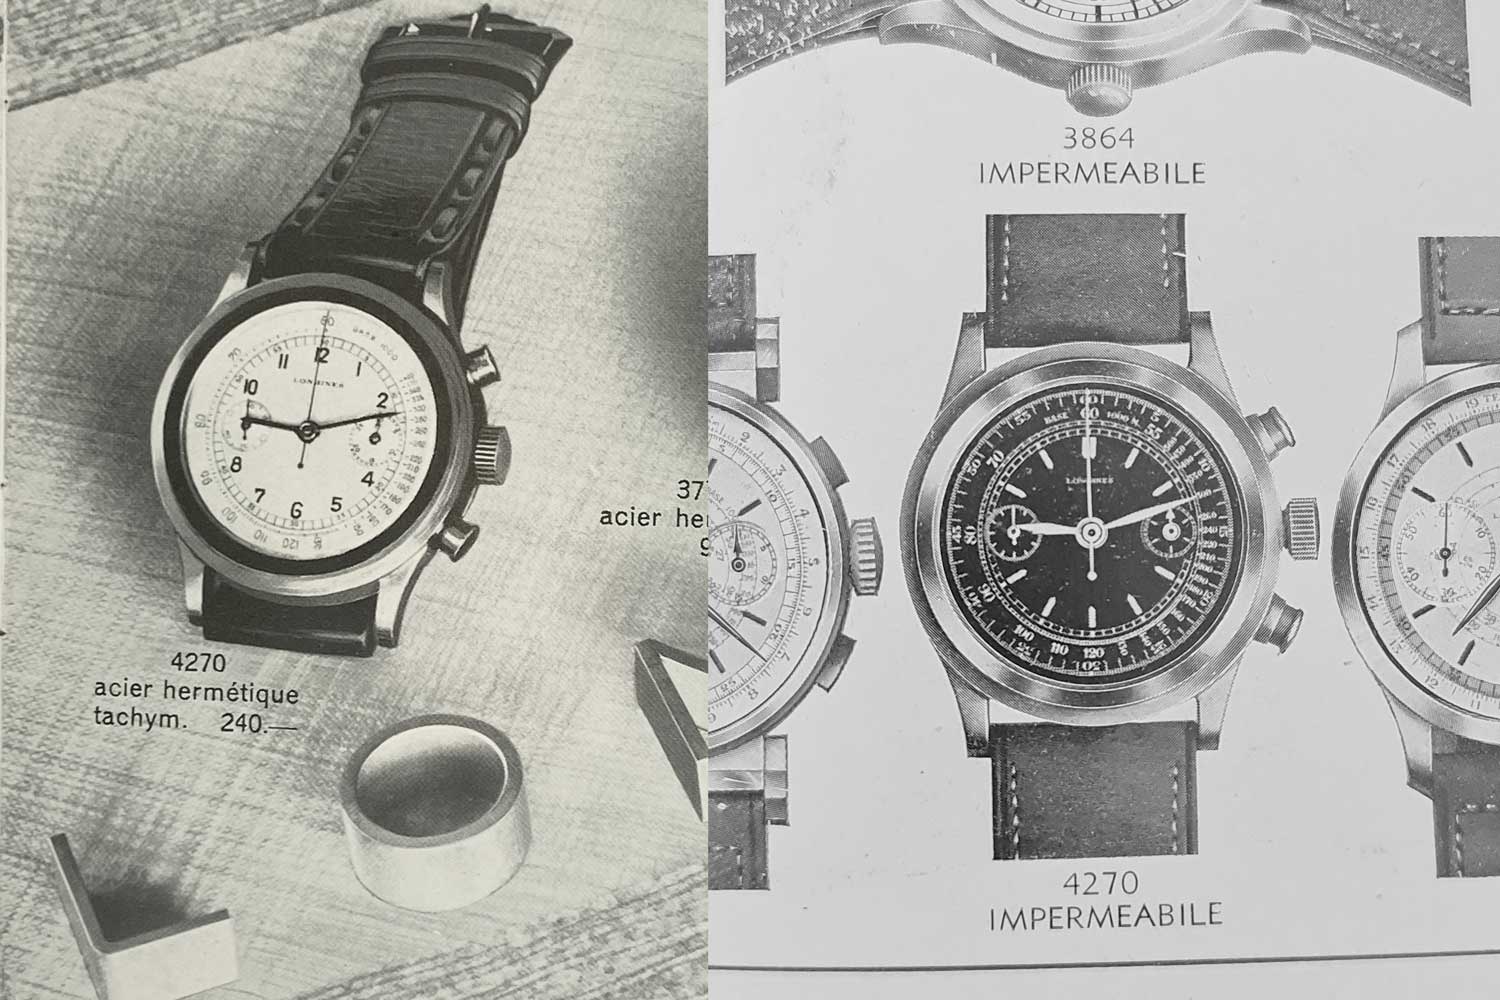 Two catalogue images from the end of the ’30s advertising a reference 4270 for sale. The words “acier hermétique tachym.” refer to the steel waterproof case of the watch and its tachymeter scale.